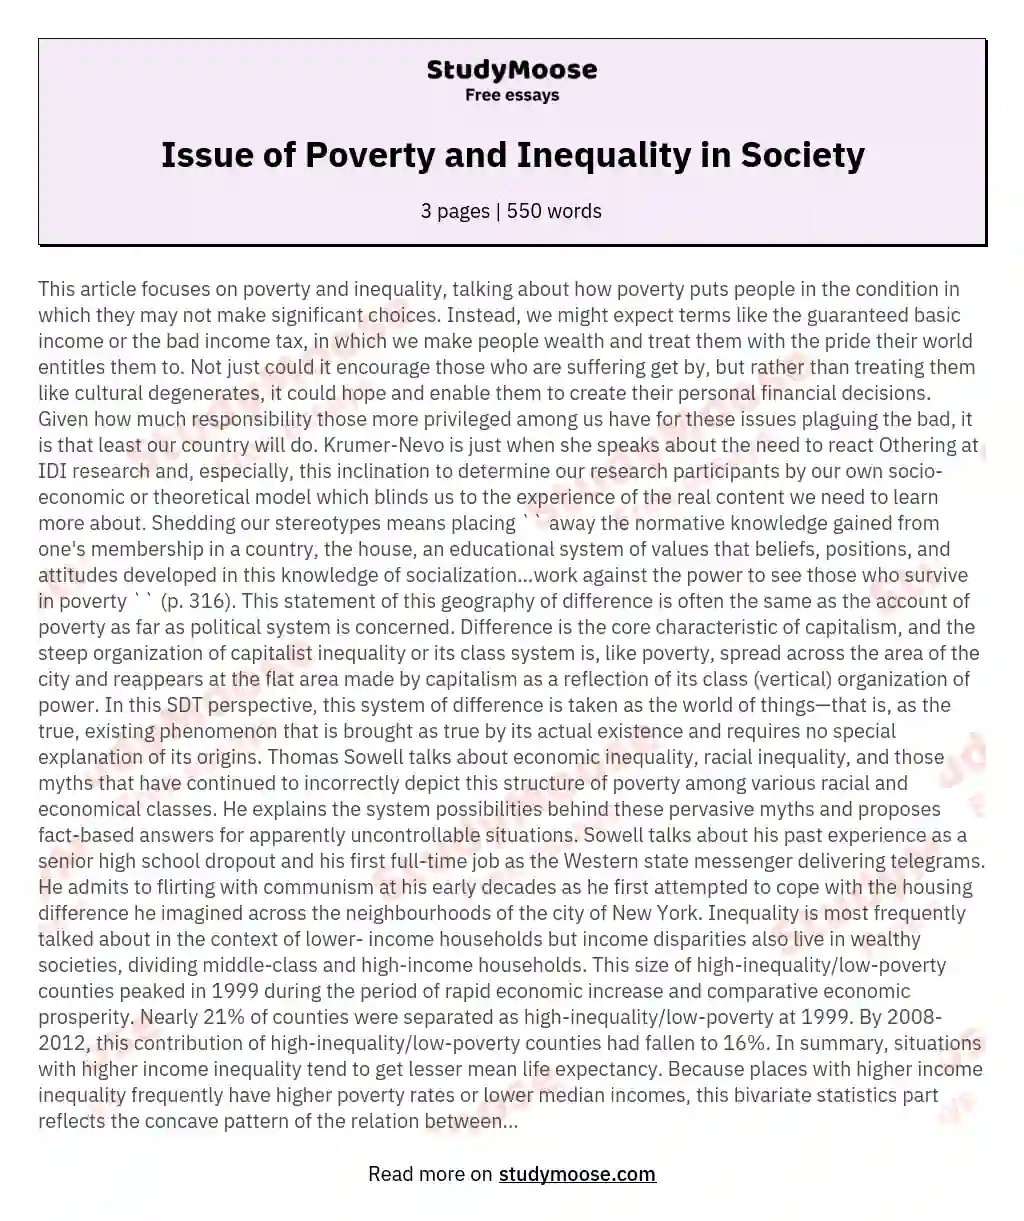 Issue of Poverty and Inequality in Society essay